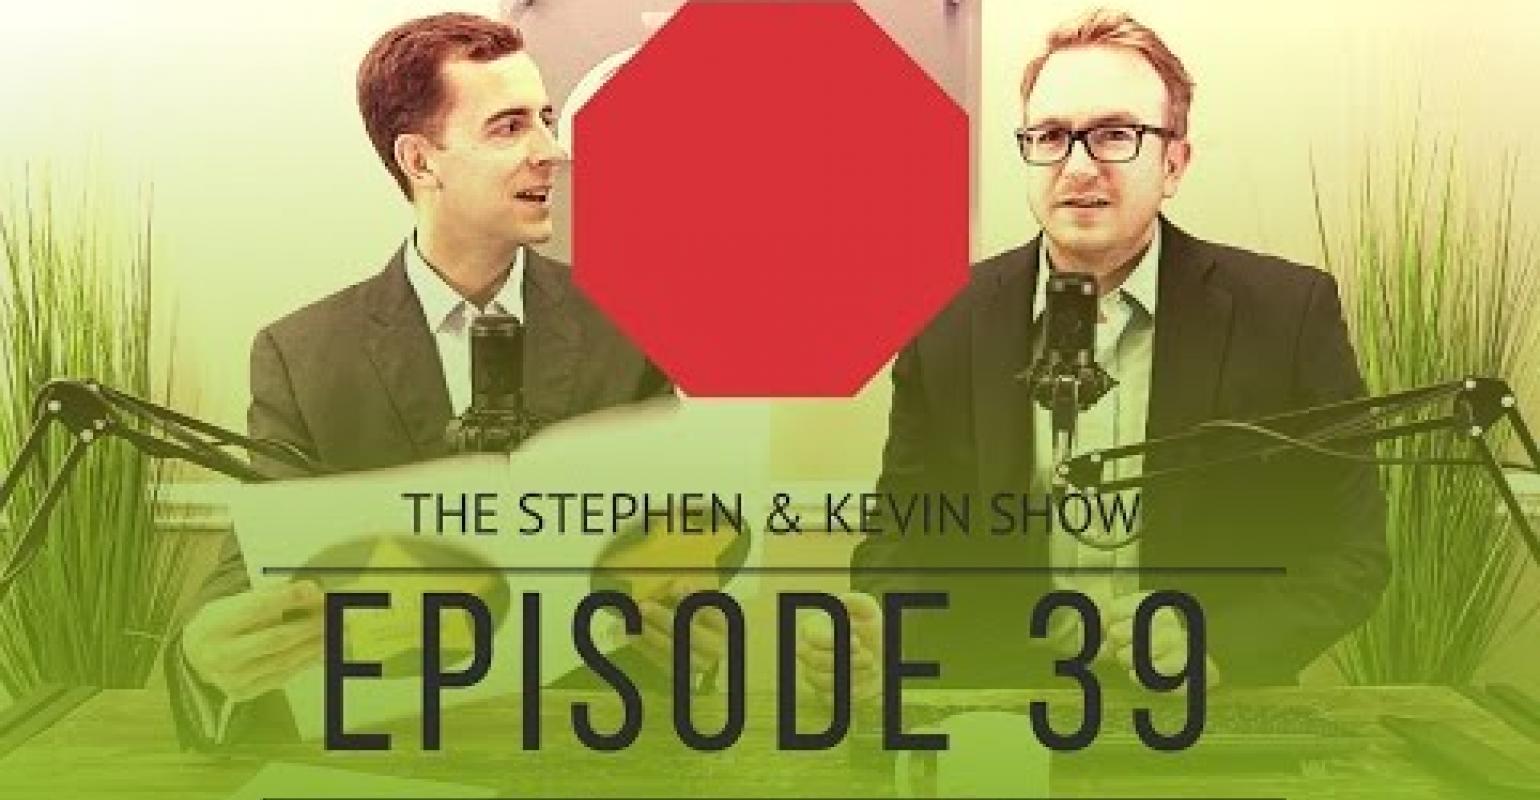 Stephen and Kevin Show Episode 39: What Are Your Success Limiters?